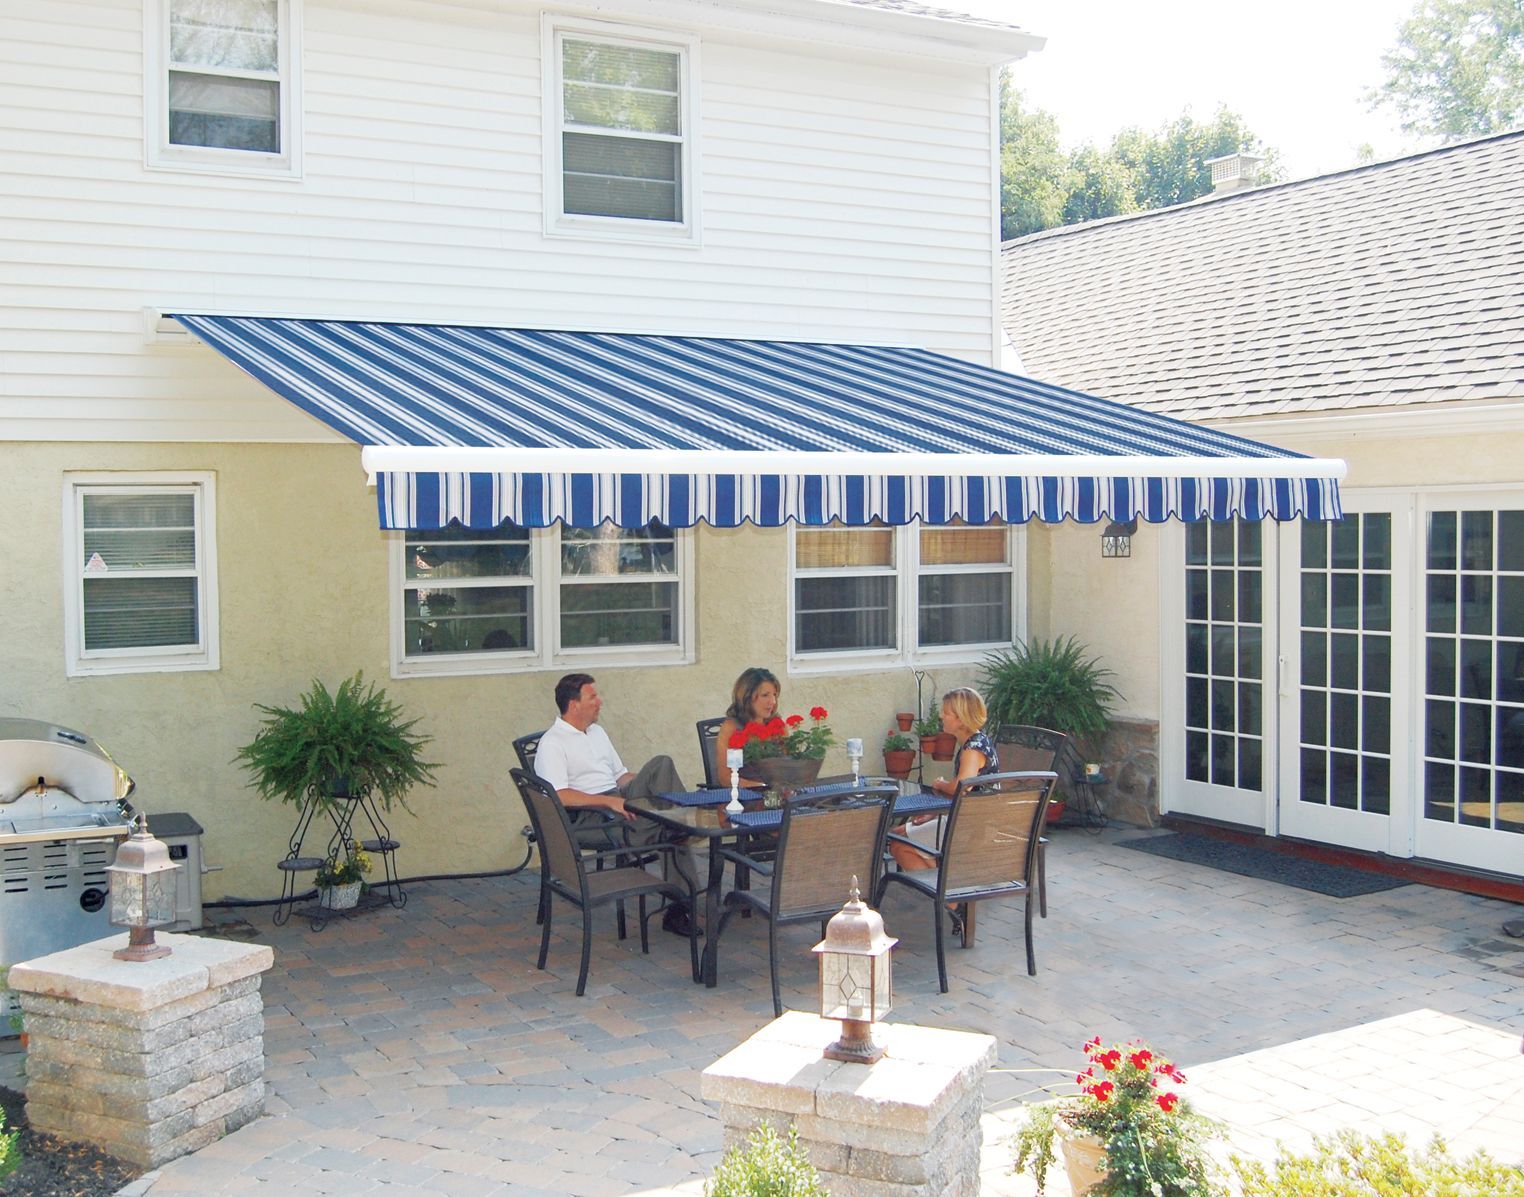 a man and woman sit under an awning on a patio